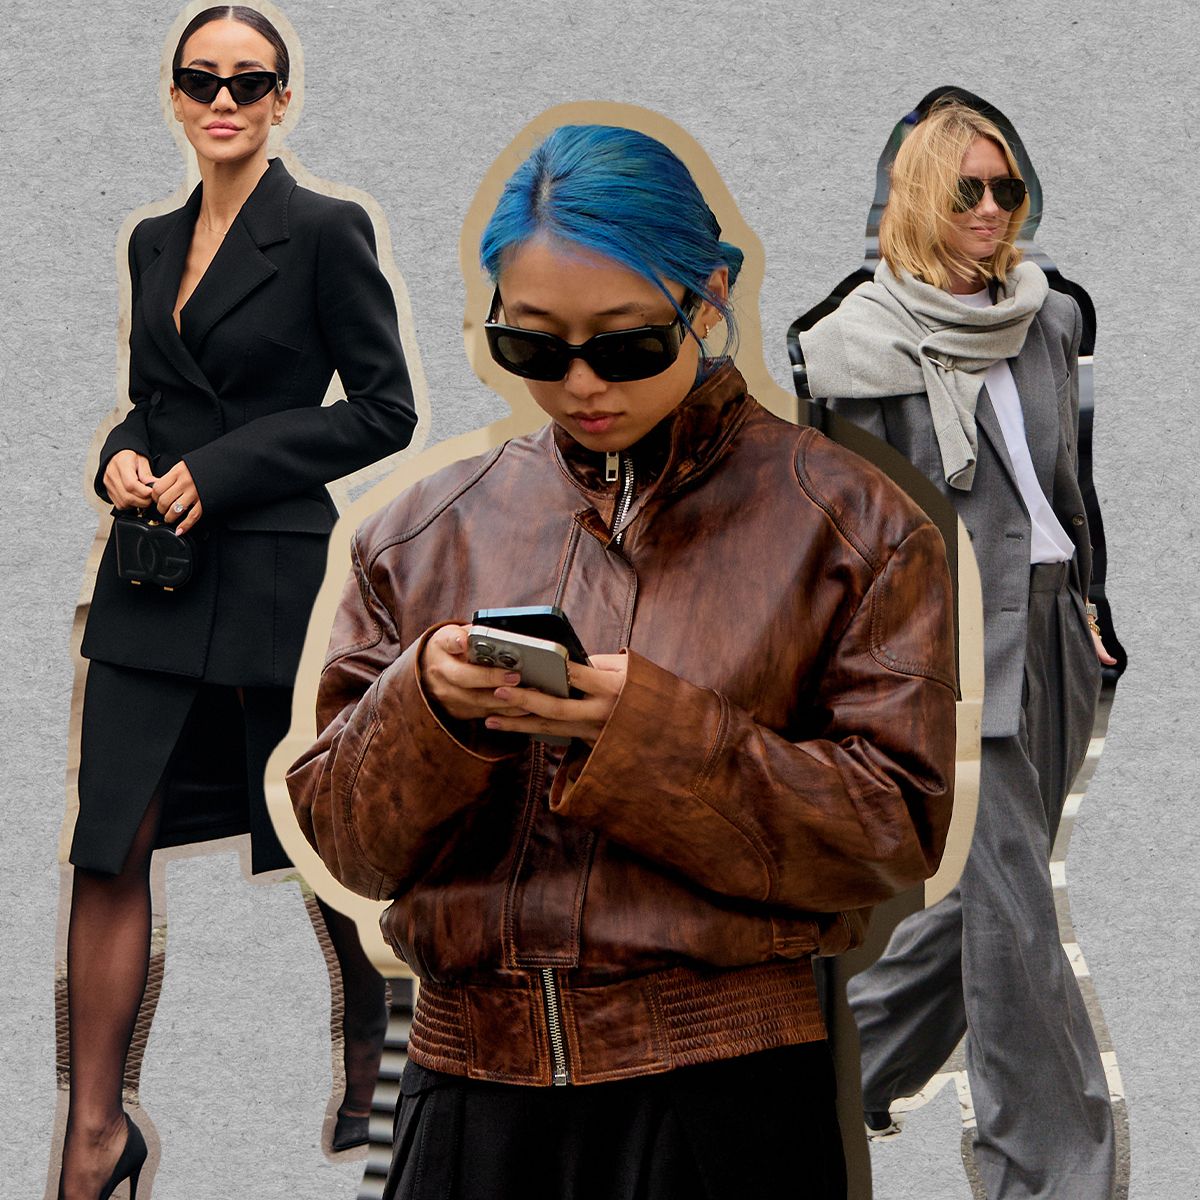 The 7 Trends Everyone Wore This Fashion Week